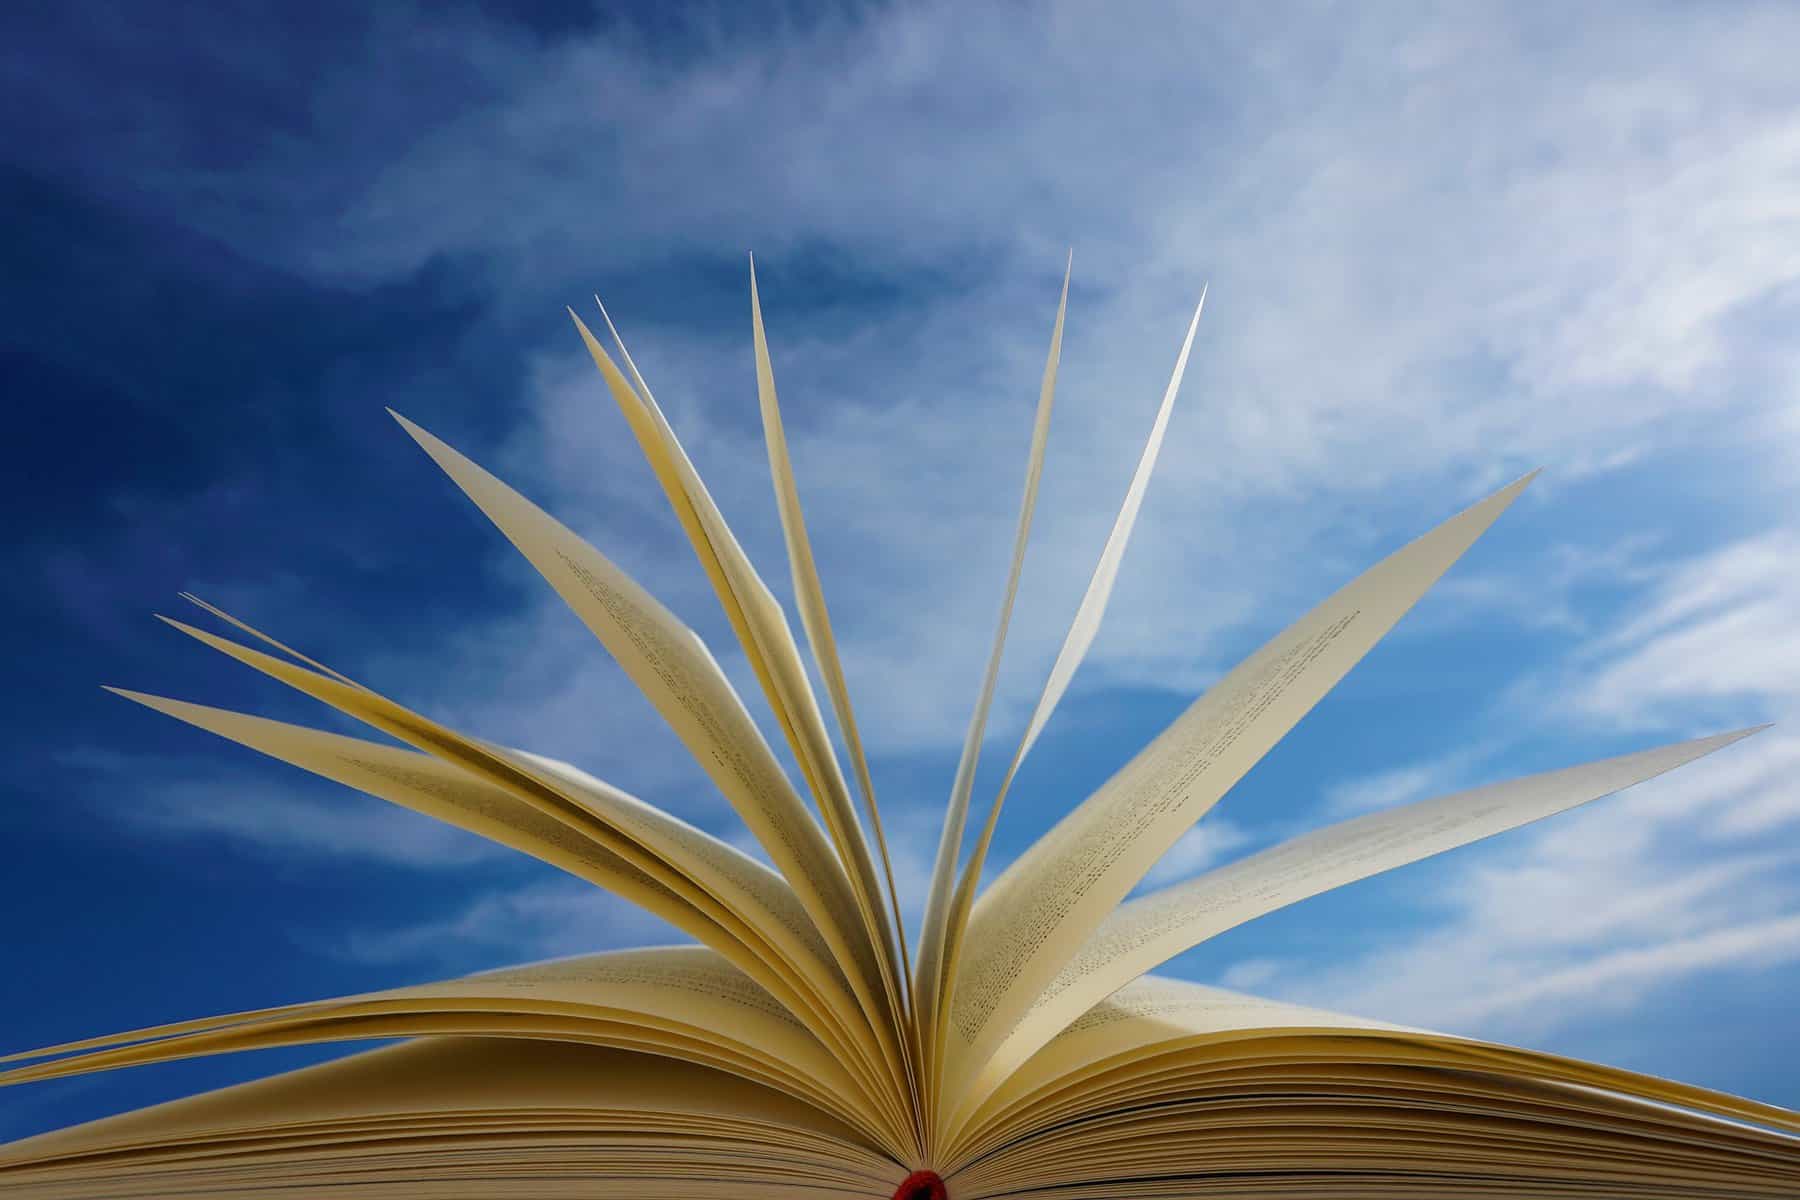 An open book laying on a flat surface is shown from the bottom with pages at various angles. A blue and cloudy sky is the backdrop.